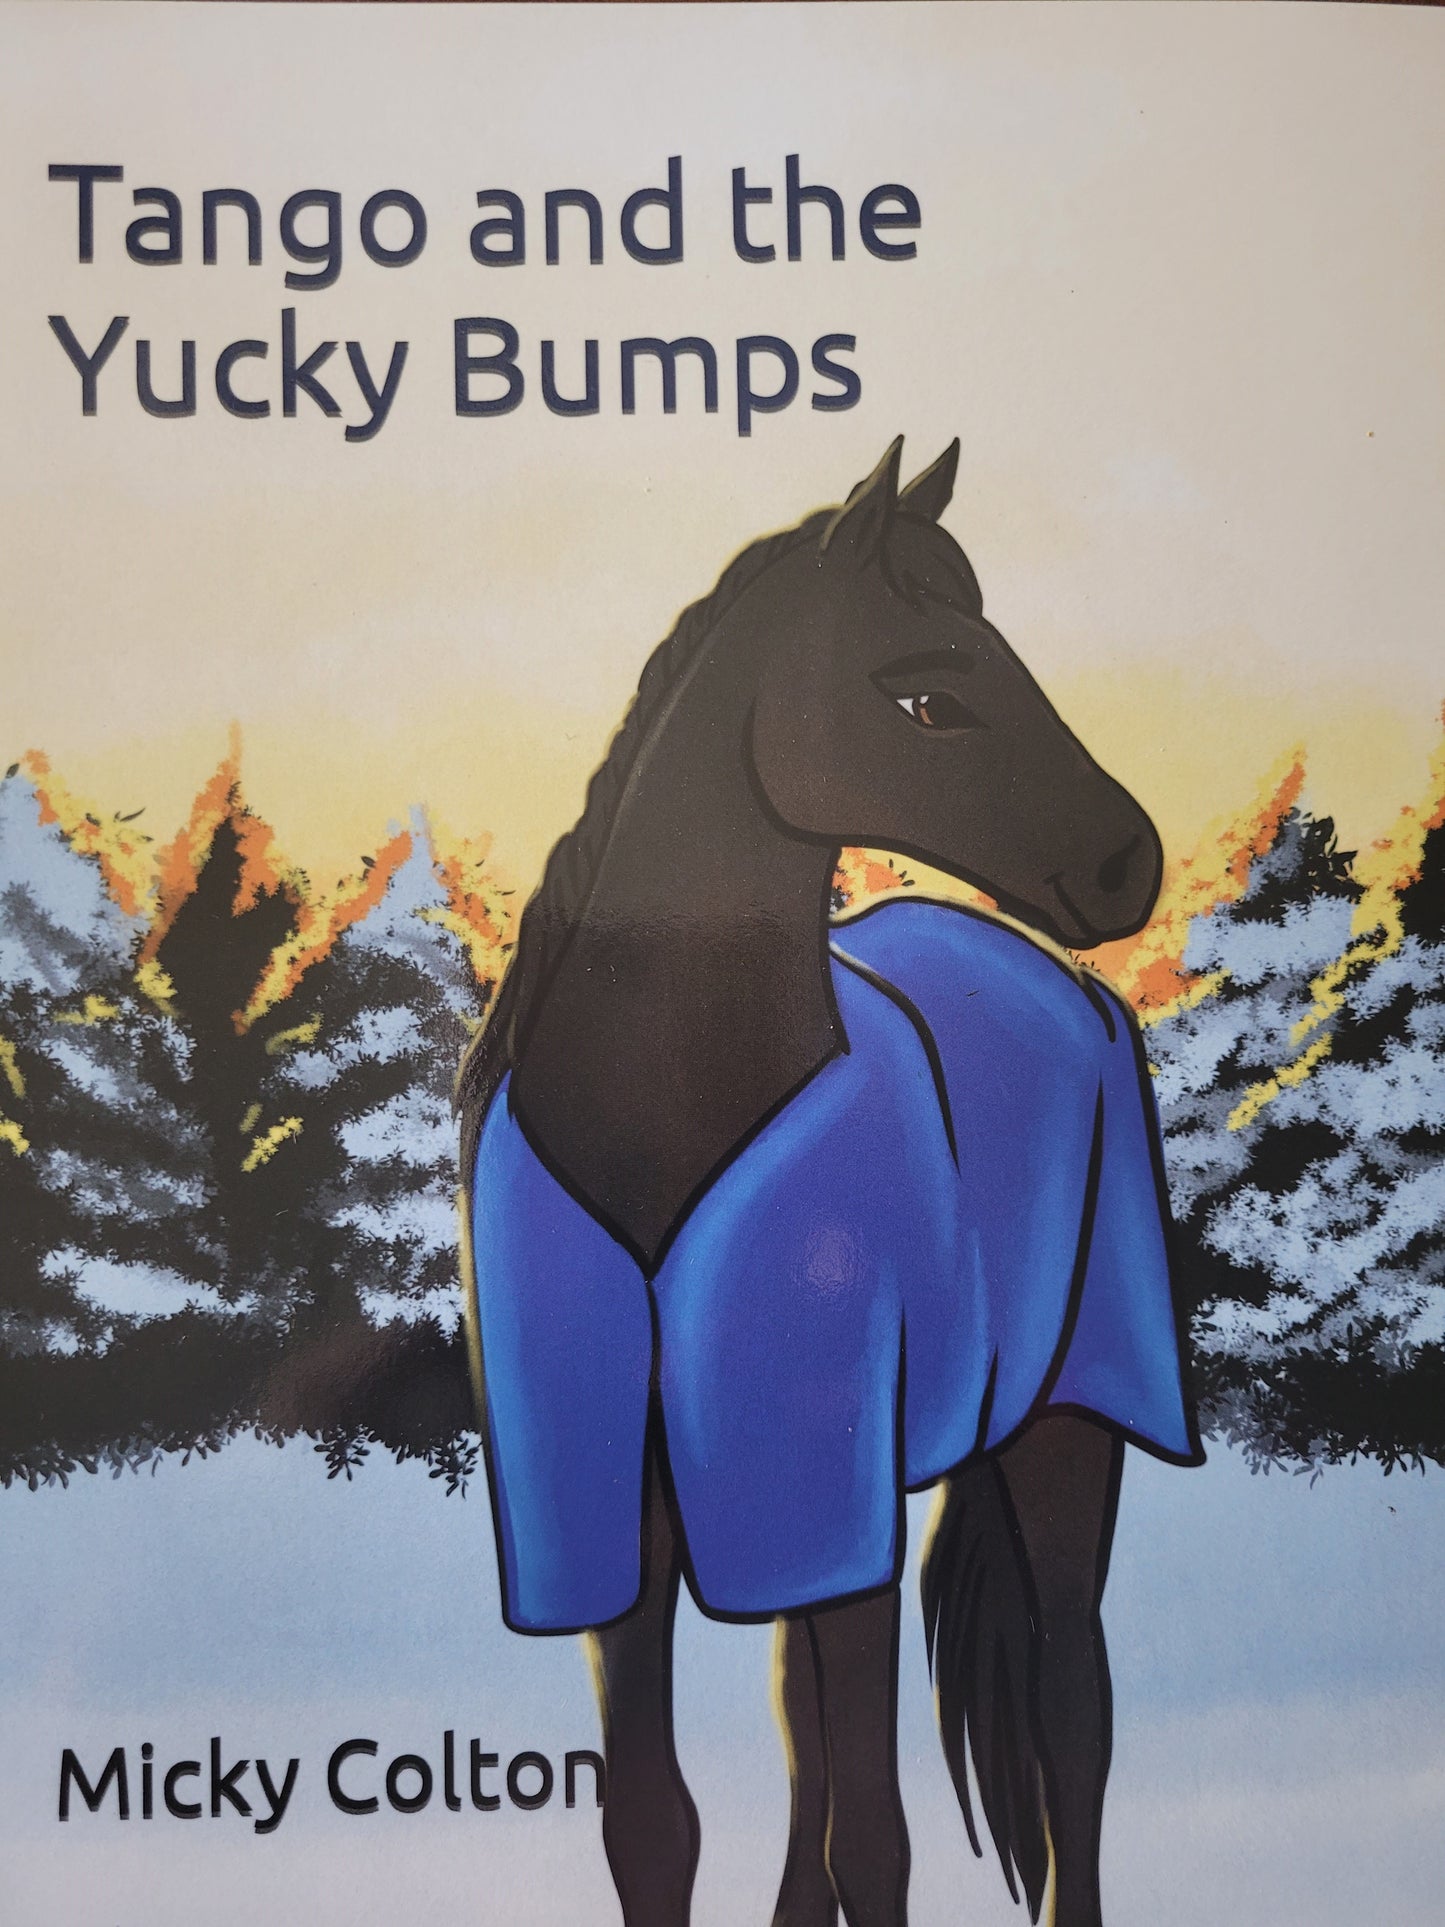 Tango and the Yucky Bumps